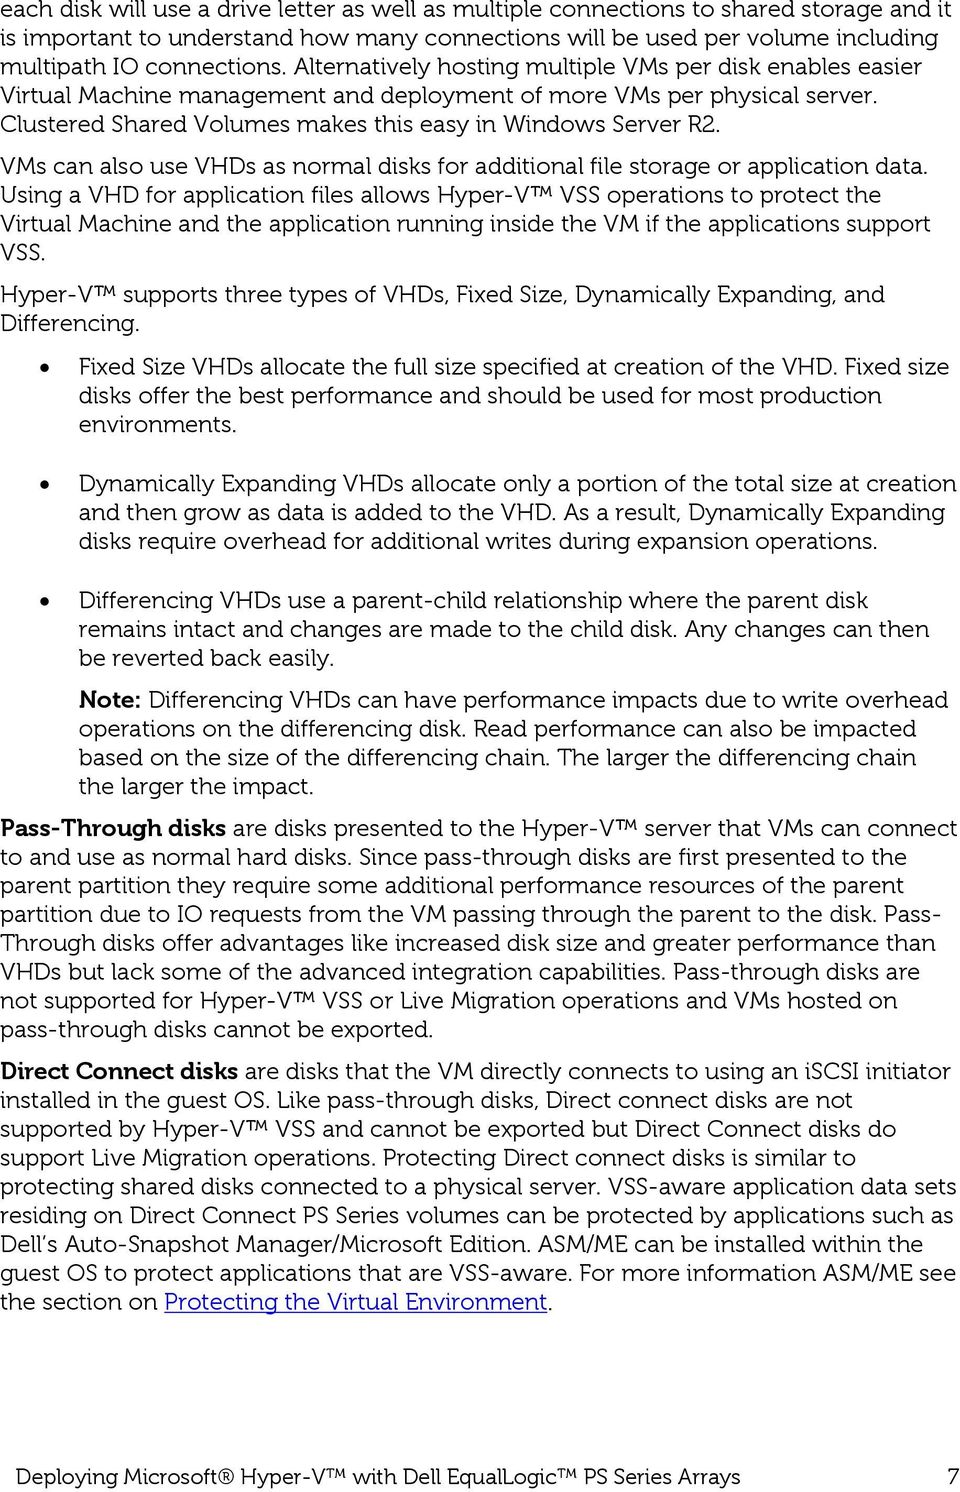 VMs can also use VHDs as normal disks for additional file storage or application data.